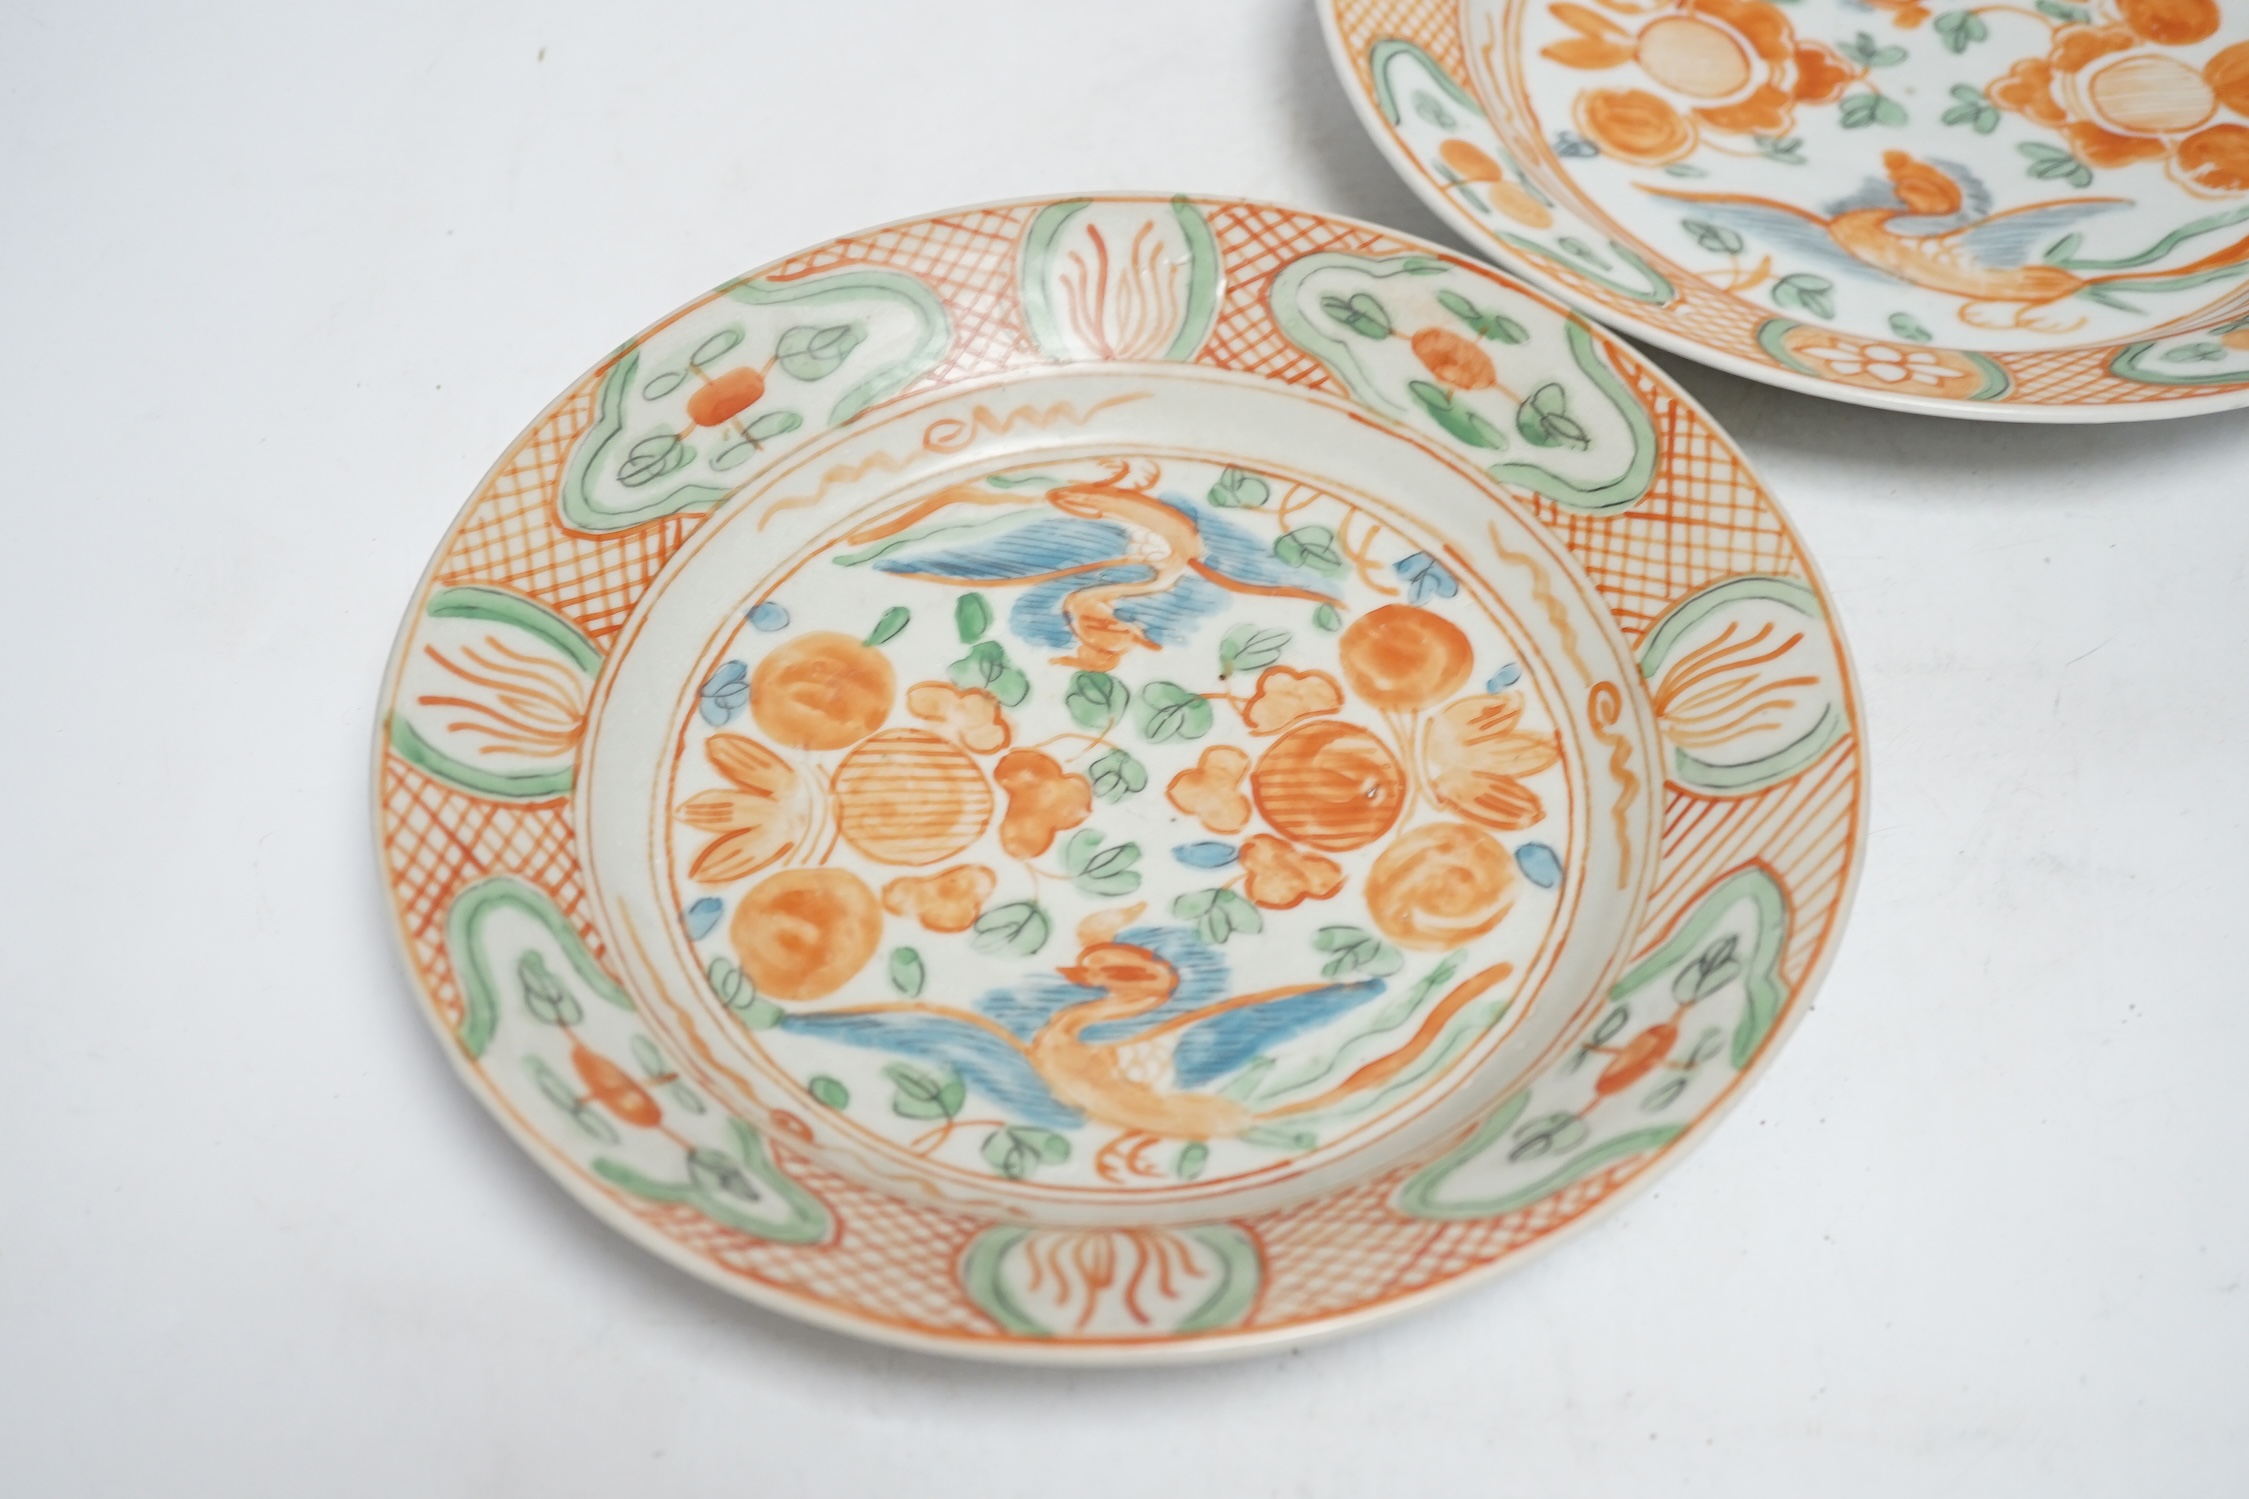 A pair of Chinese Swatow enamelled porcelain plates, late 16th century, 24cm - Image 2 of 4